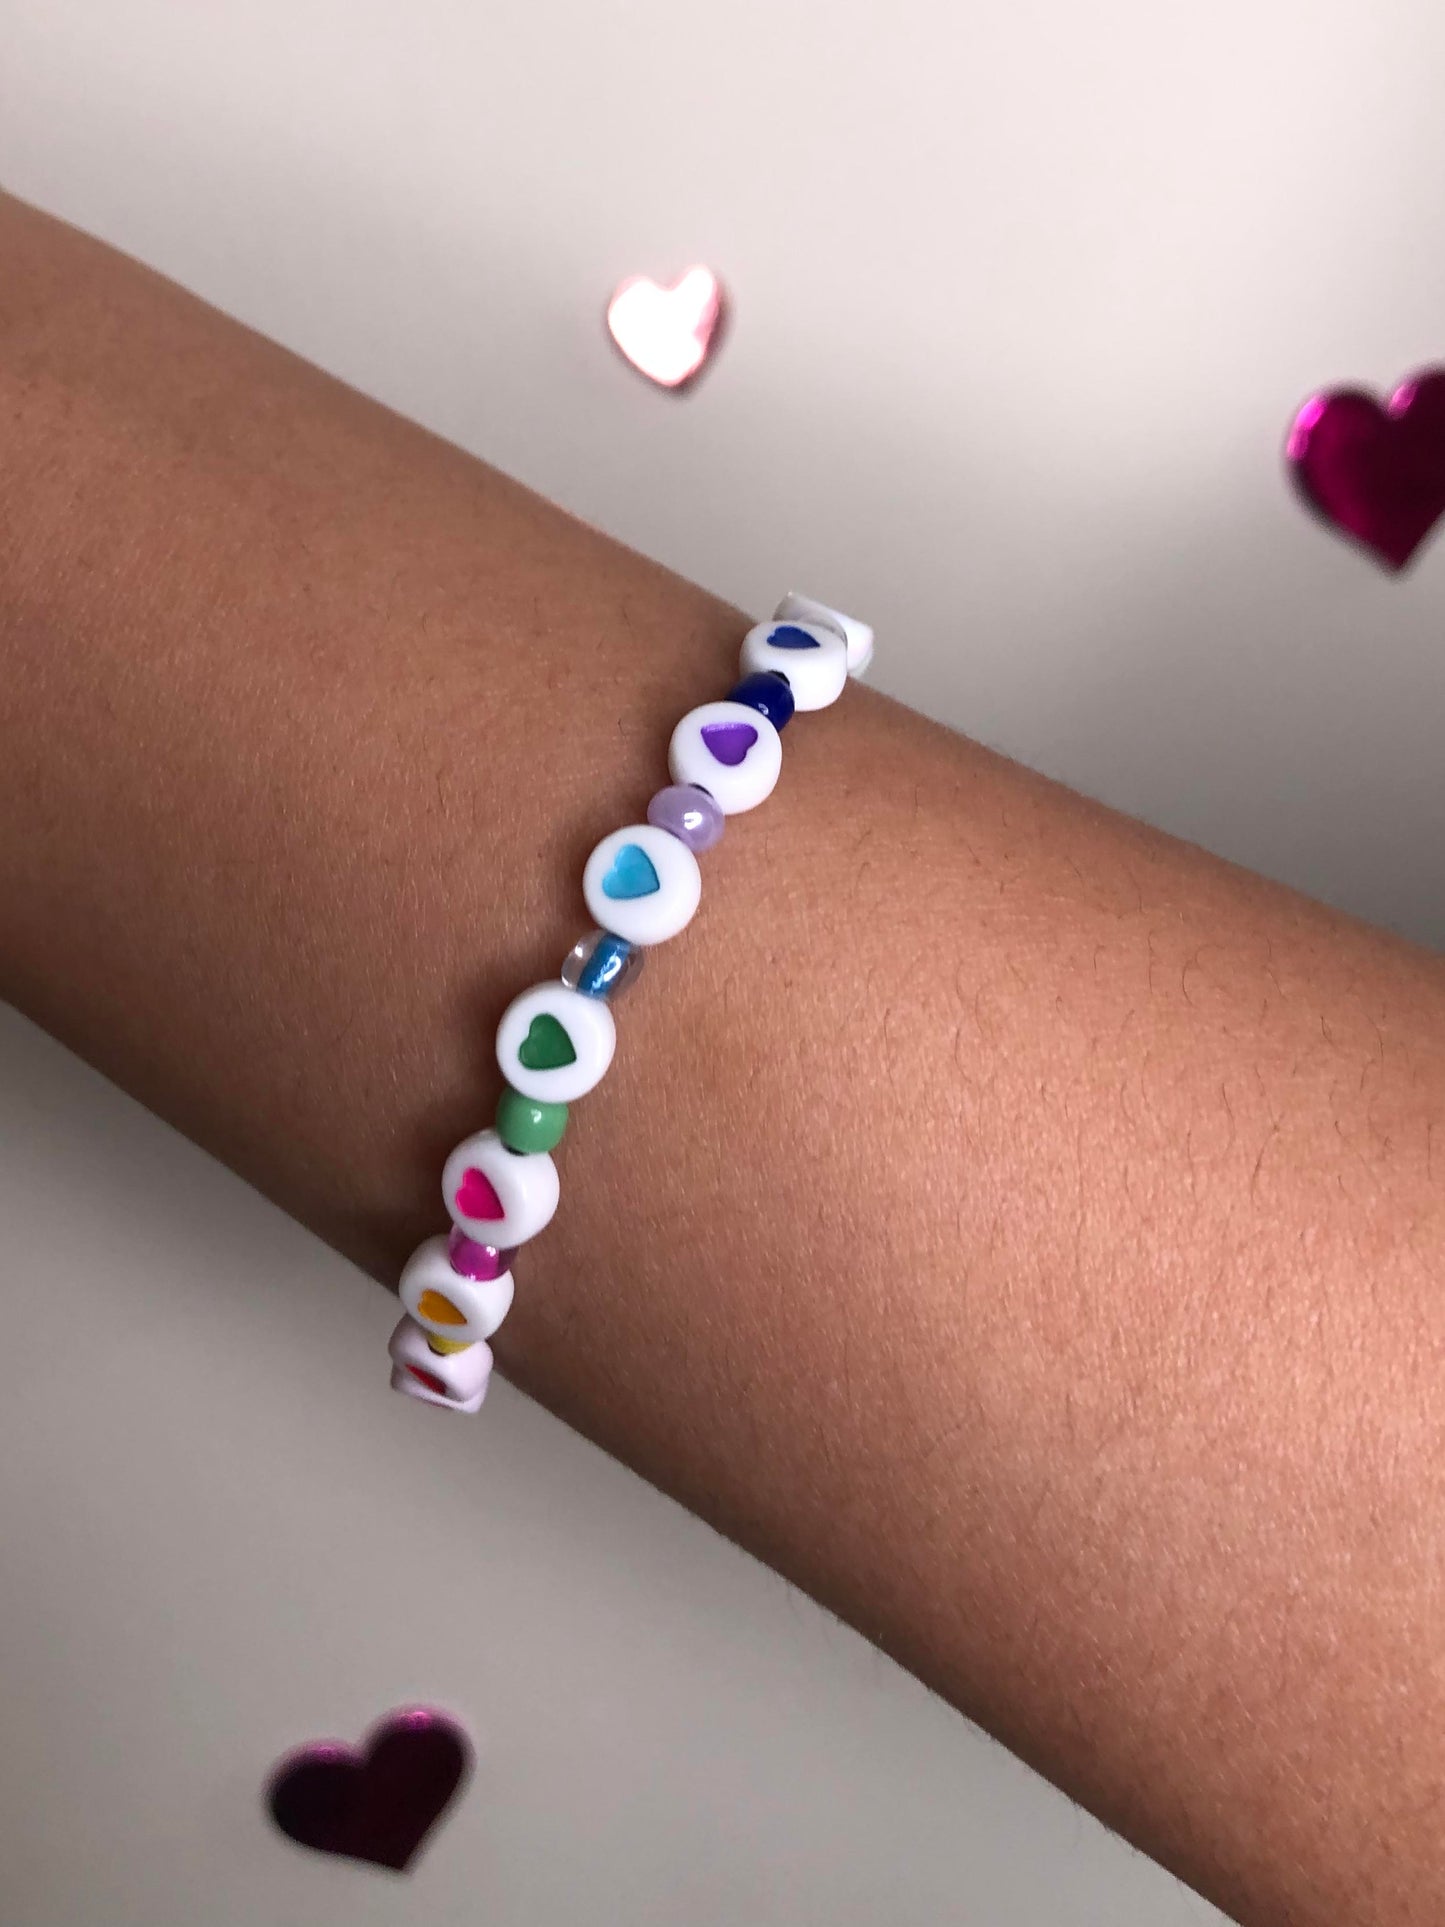 Handmade multicolored heart, letter, and glass beaded bracelet with the word "love".